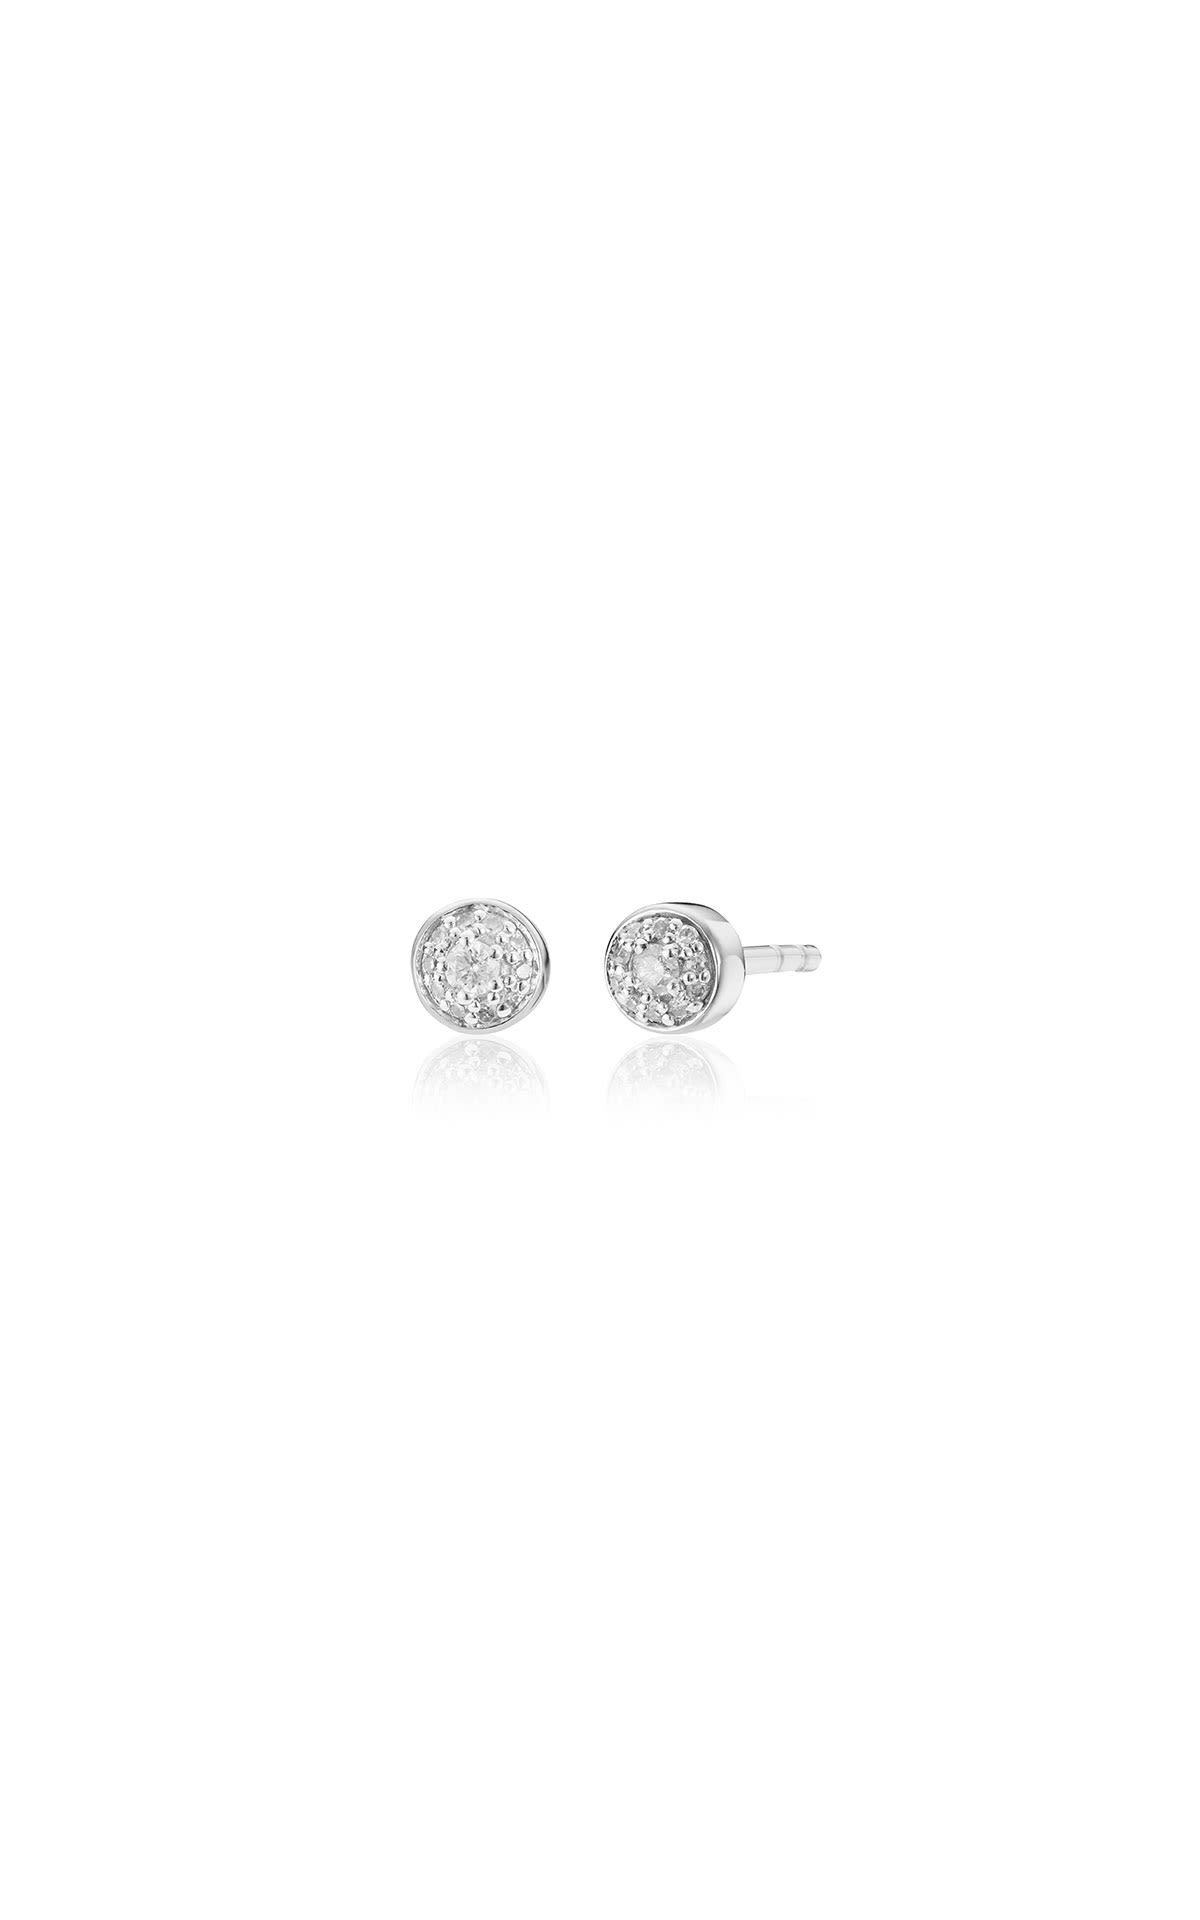 Monica Vinader Fiji tiny button diamond stud earrings   from Bicester Village